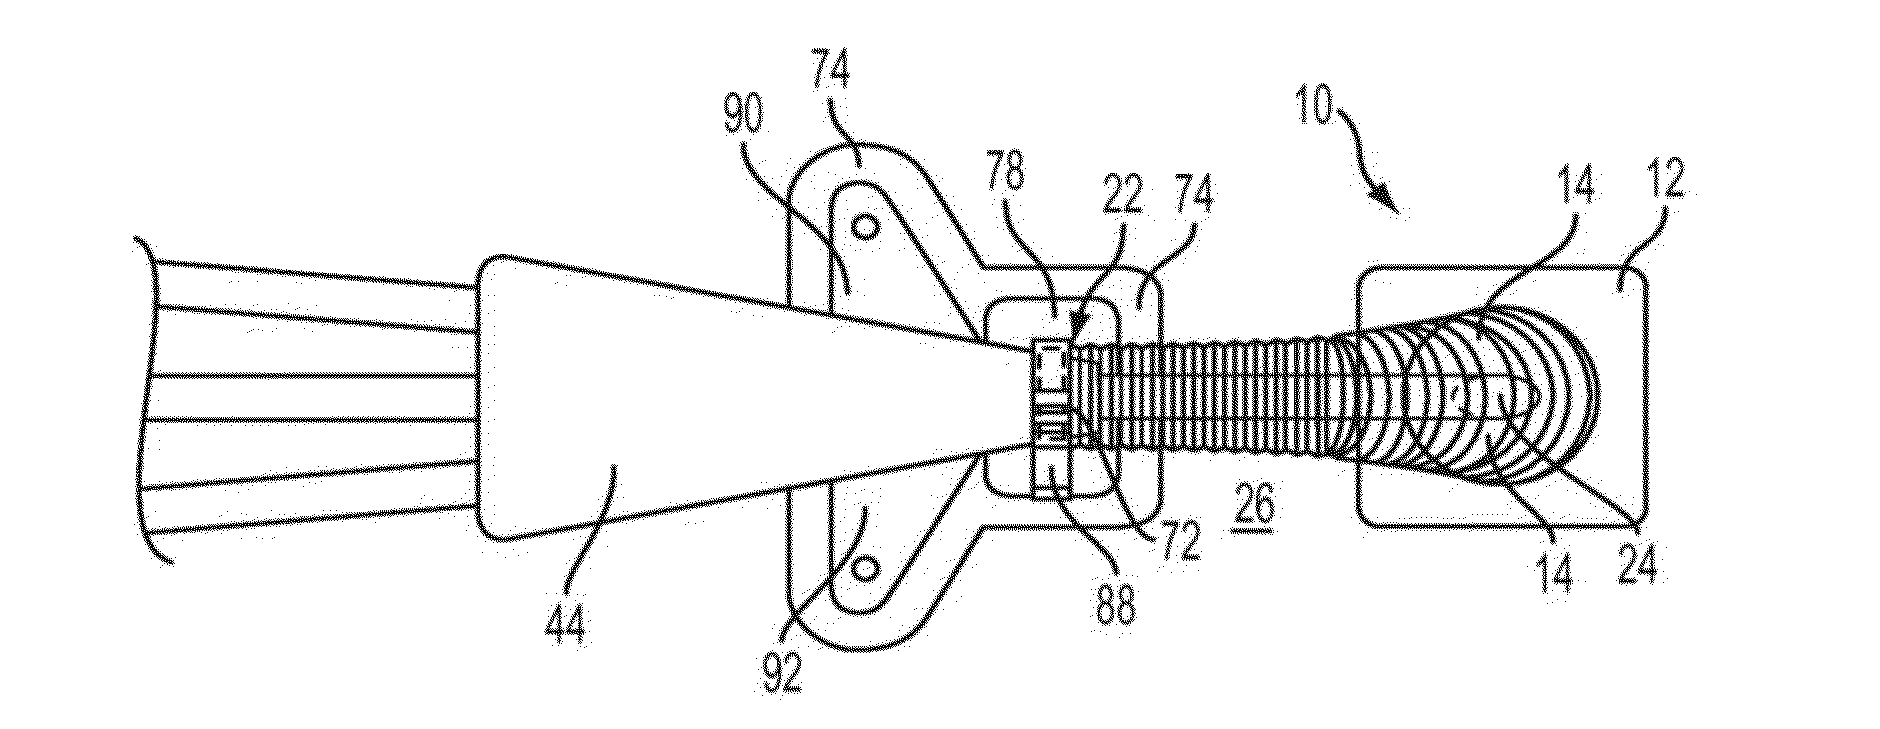 Catheter Extension With Integrated Circumferentially Sealing Securement Dressing